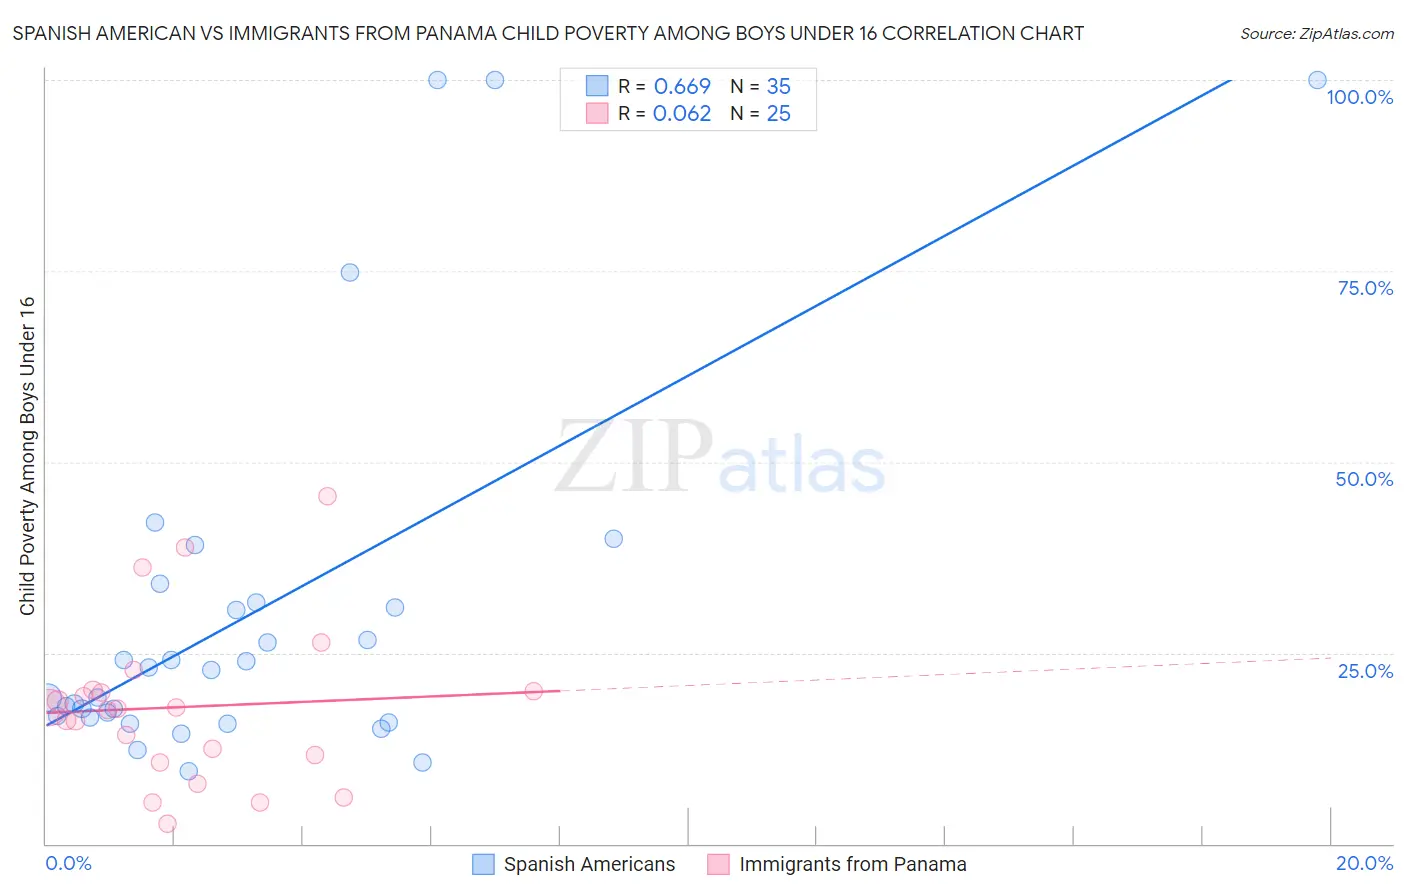 Spanish American vs Immigrants from Panama Child Poverty Among Boys Under 16